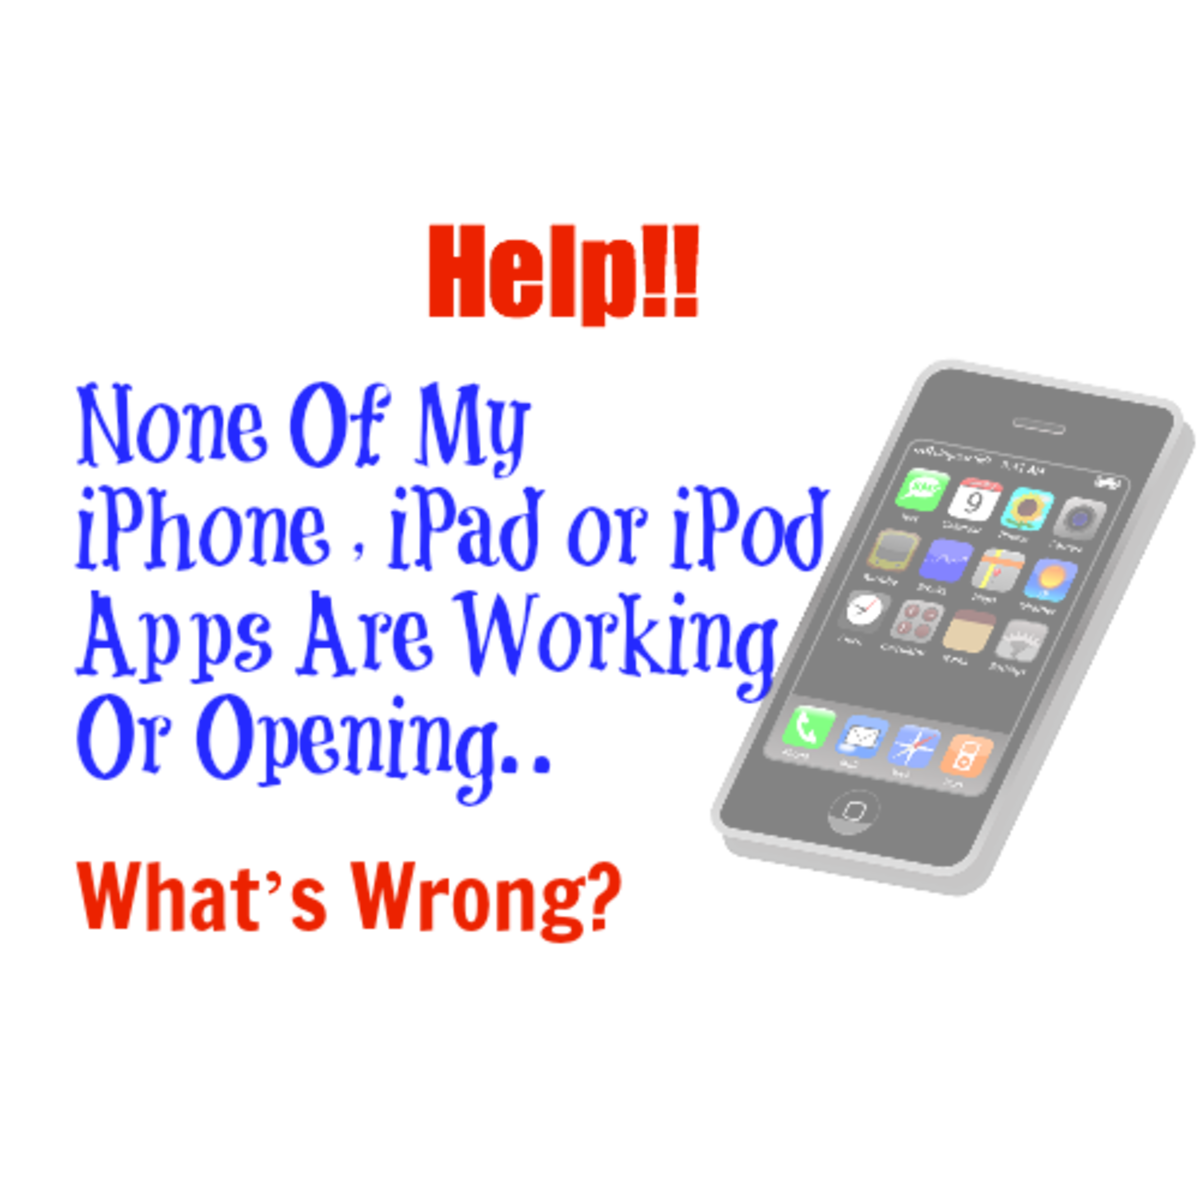 What's Wrong When None of Your iPhone or iPad Apps Will Open or Work